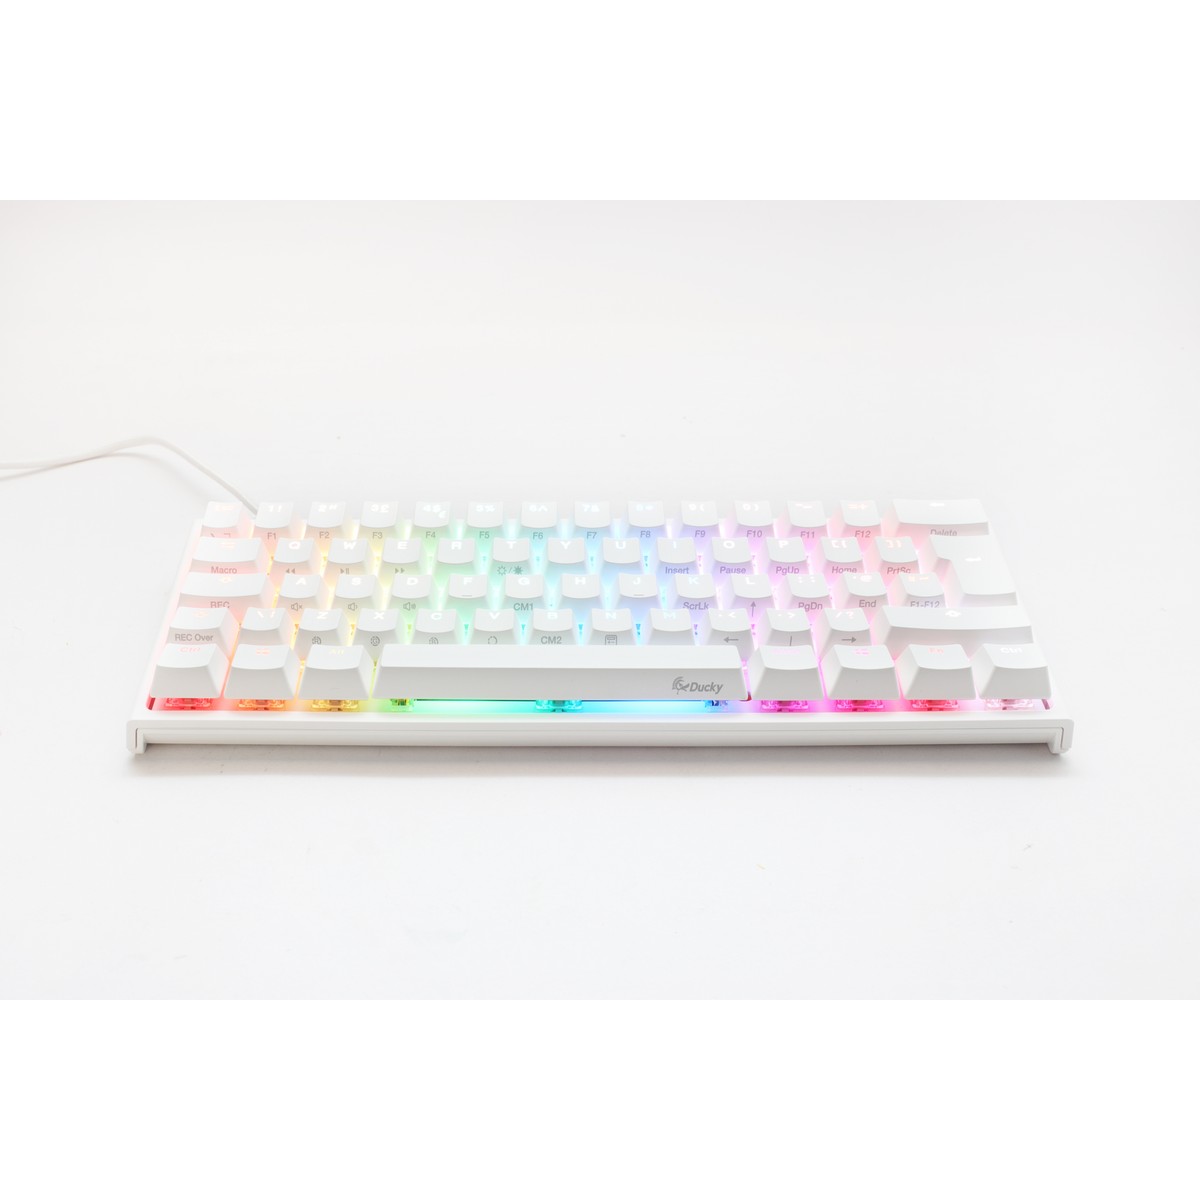 Ducky - Ducky One 2 Pro Mini 60% Mechanical Gaming Keyboard MX Cherry Red Switch White Frame - UK Layout